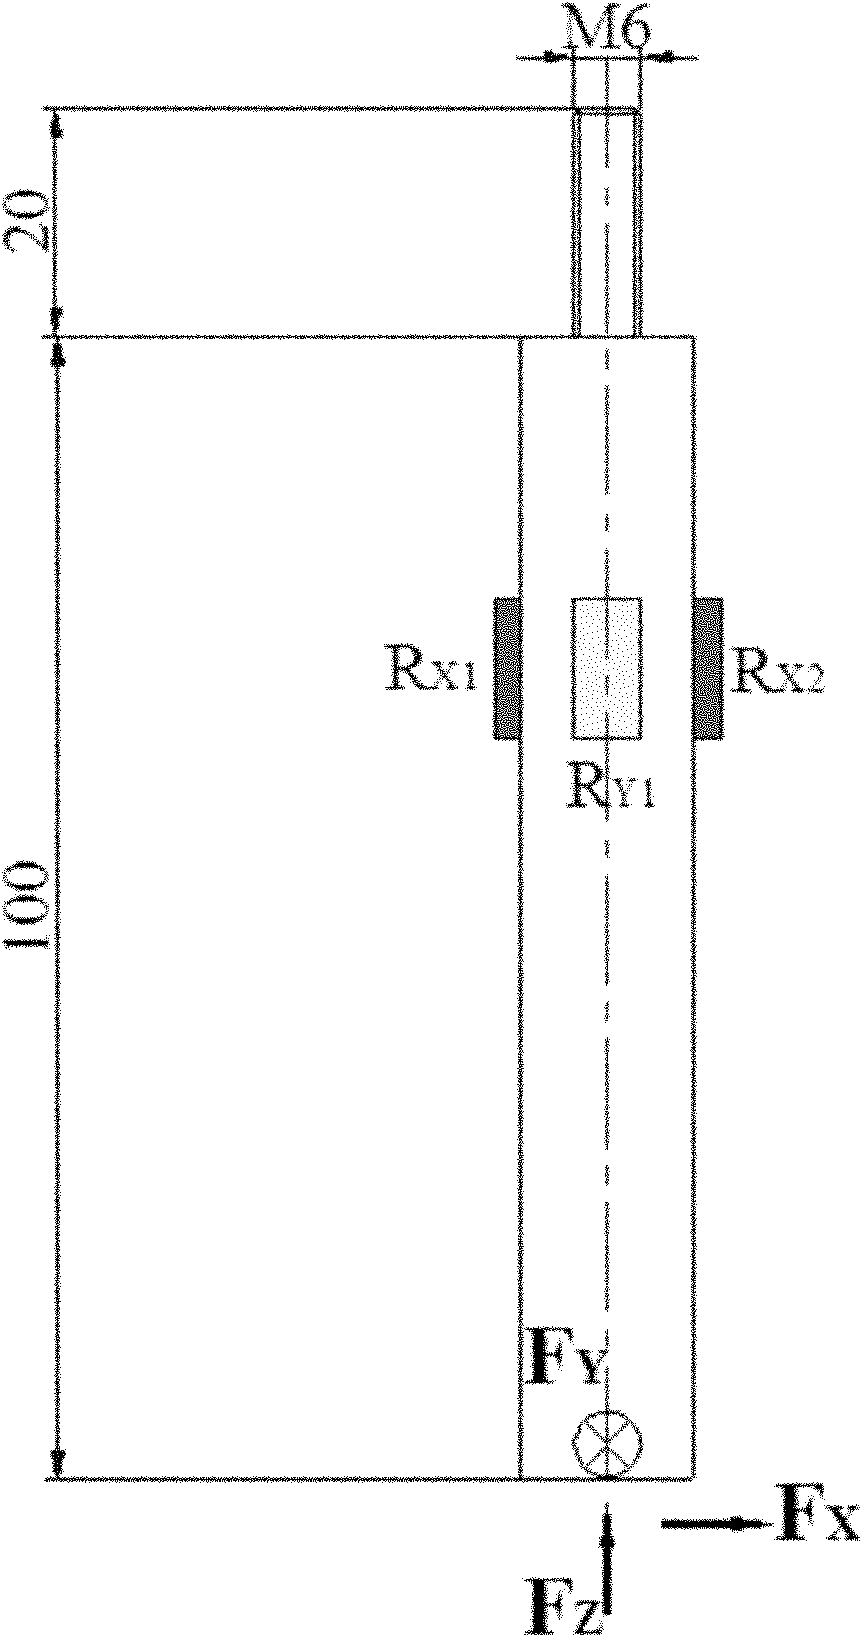 On-line measuring device for frictional force generated during polishing of small-sized wafer